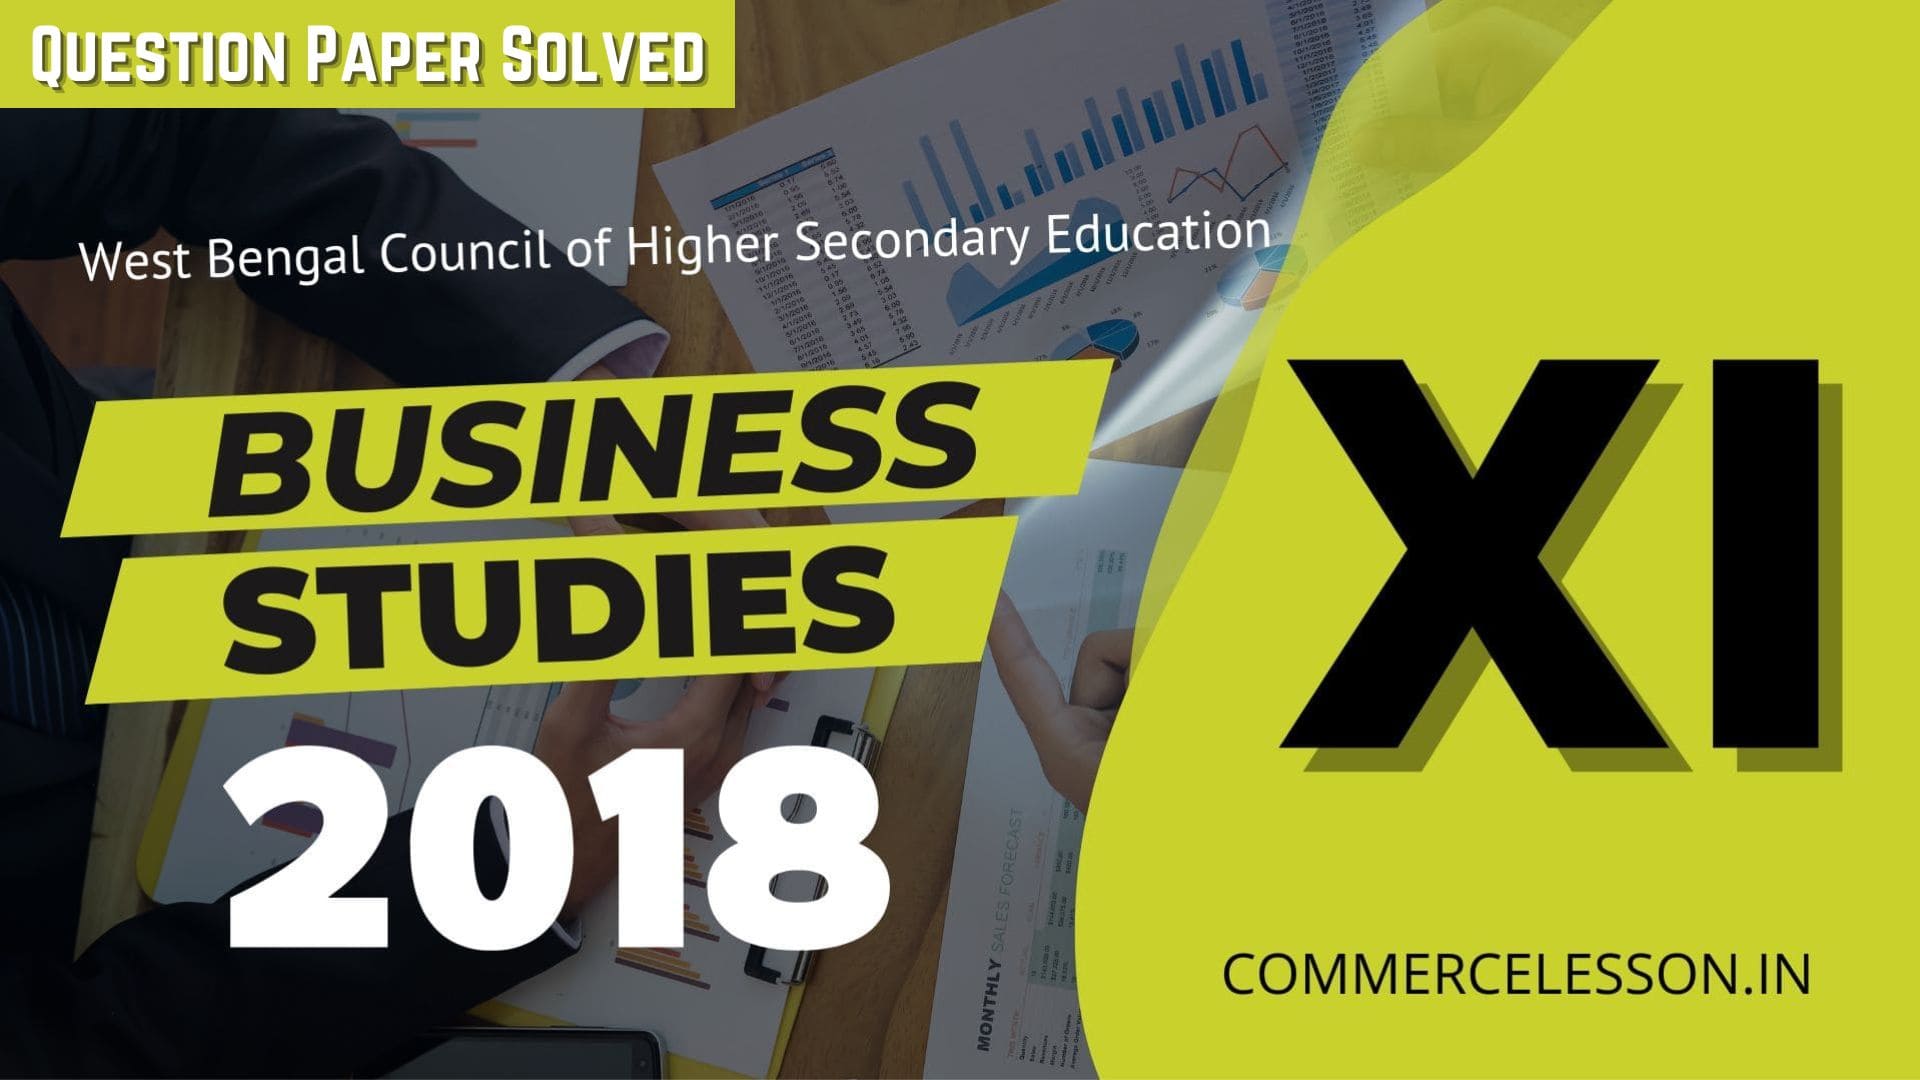 Business Studies Question Paper Solved 2018